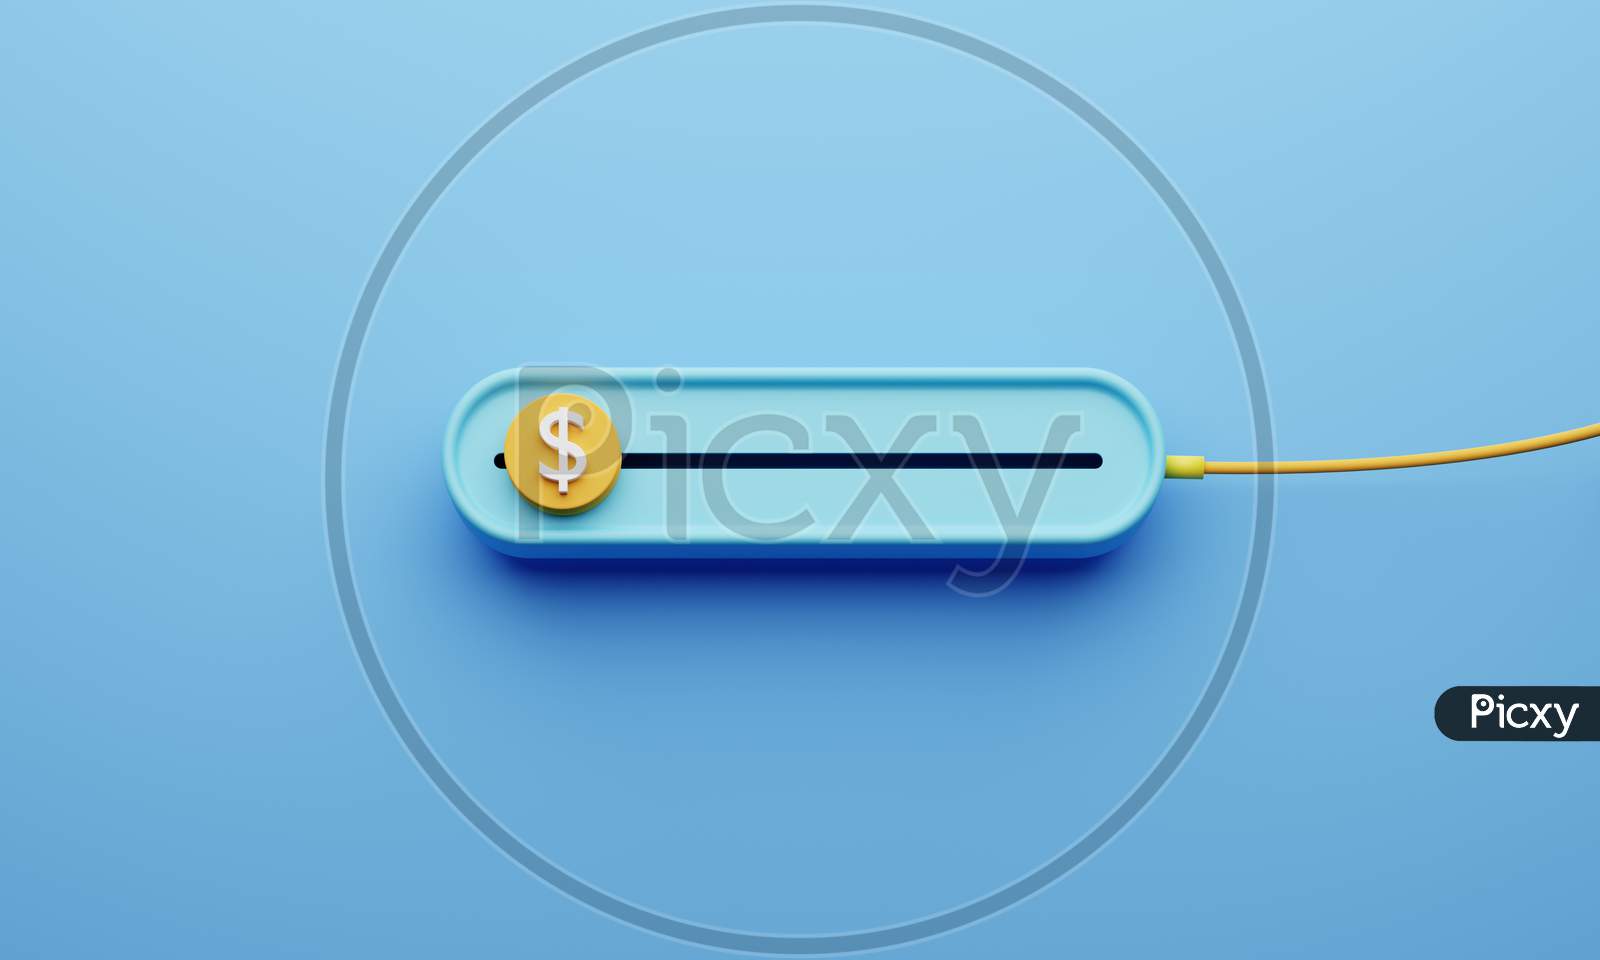 Us Dollar Slide Bar On Blue Background. Slider For Making Profit By Sell Or Buy In Forex Stock Market Theme. Economic And Business Investment Concept. 3D Illustration Rendering Graphic Design